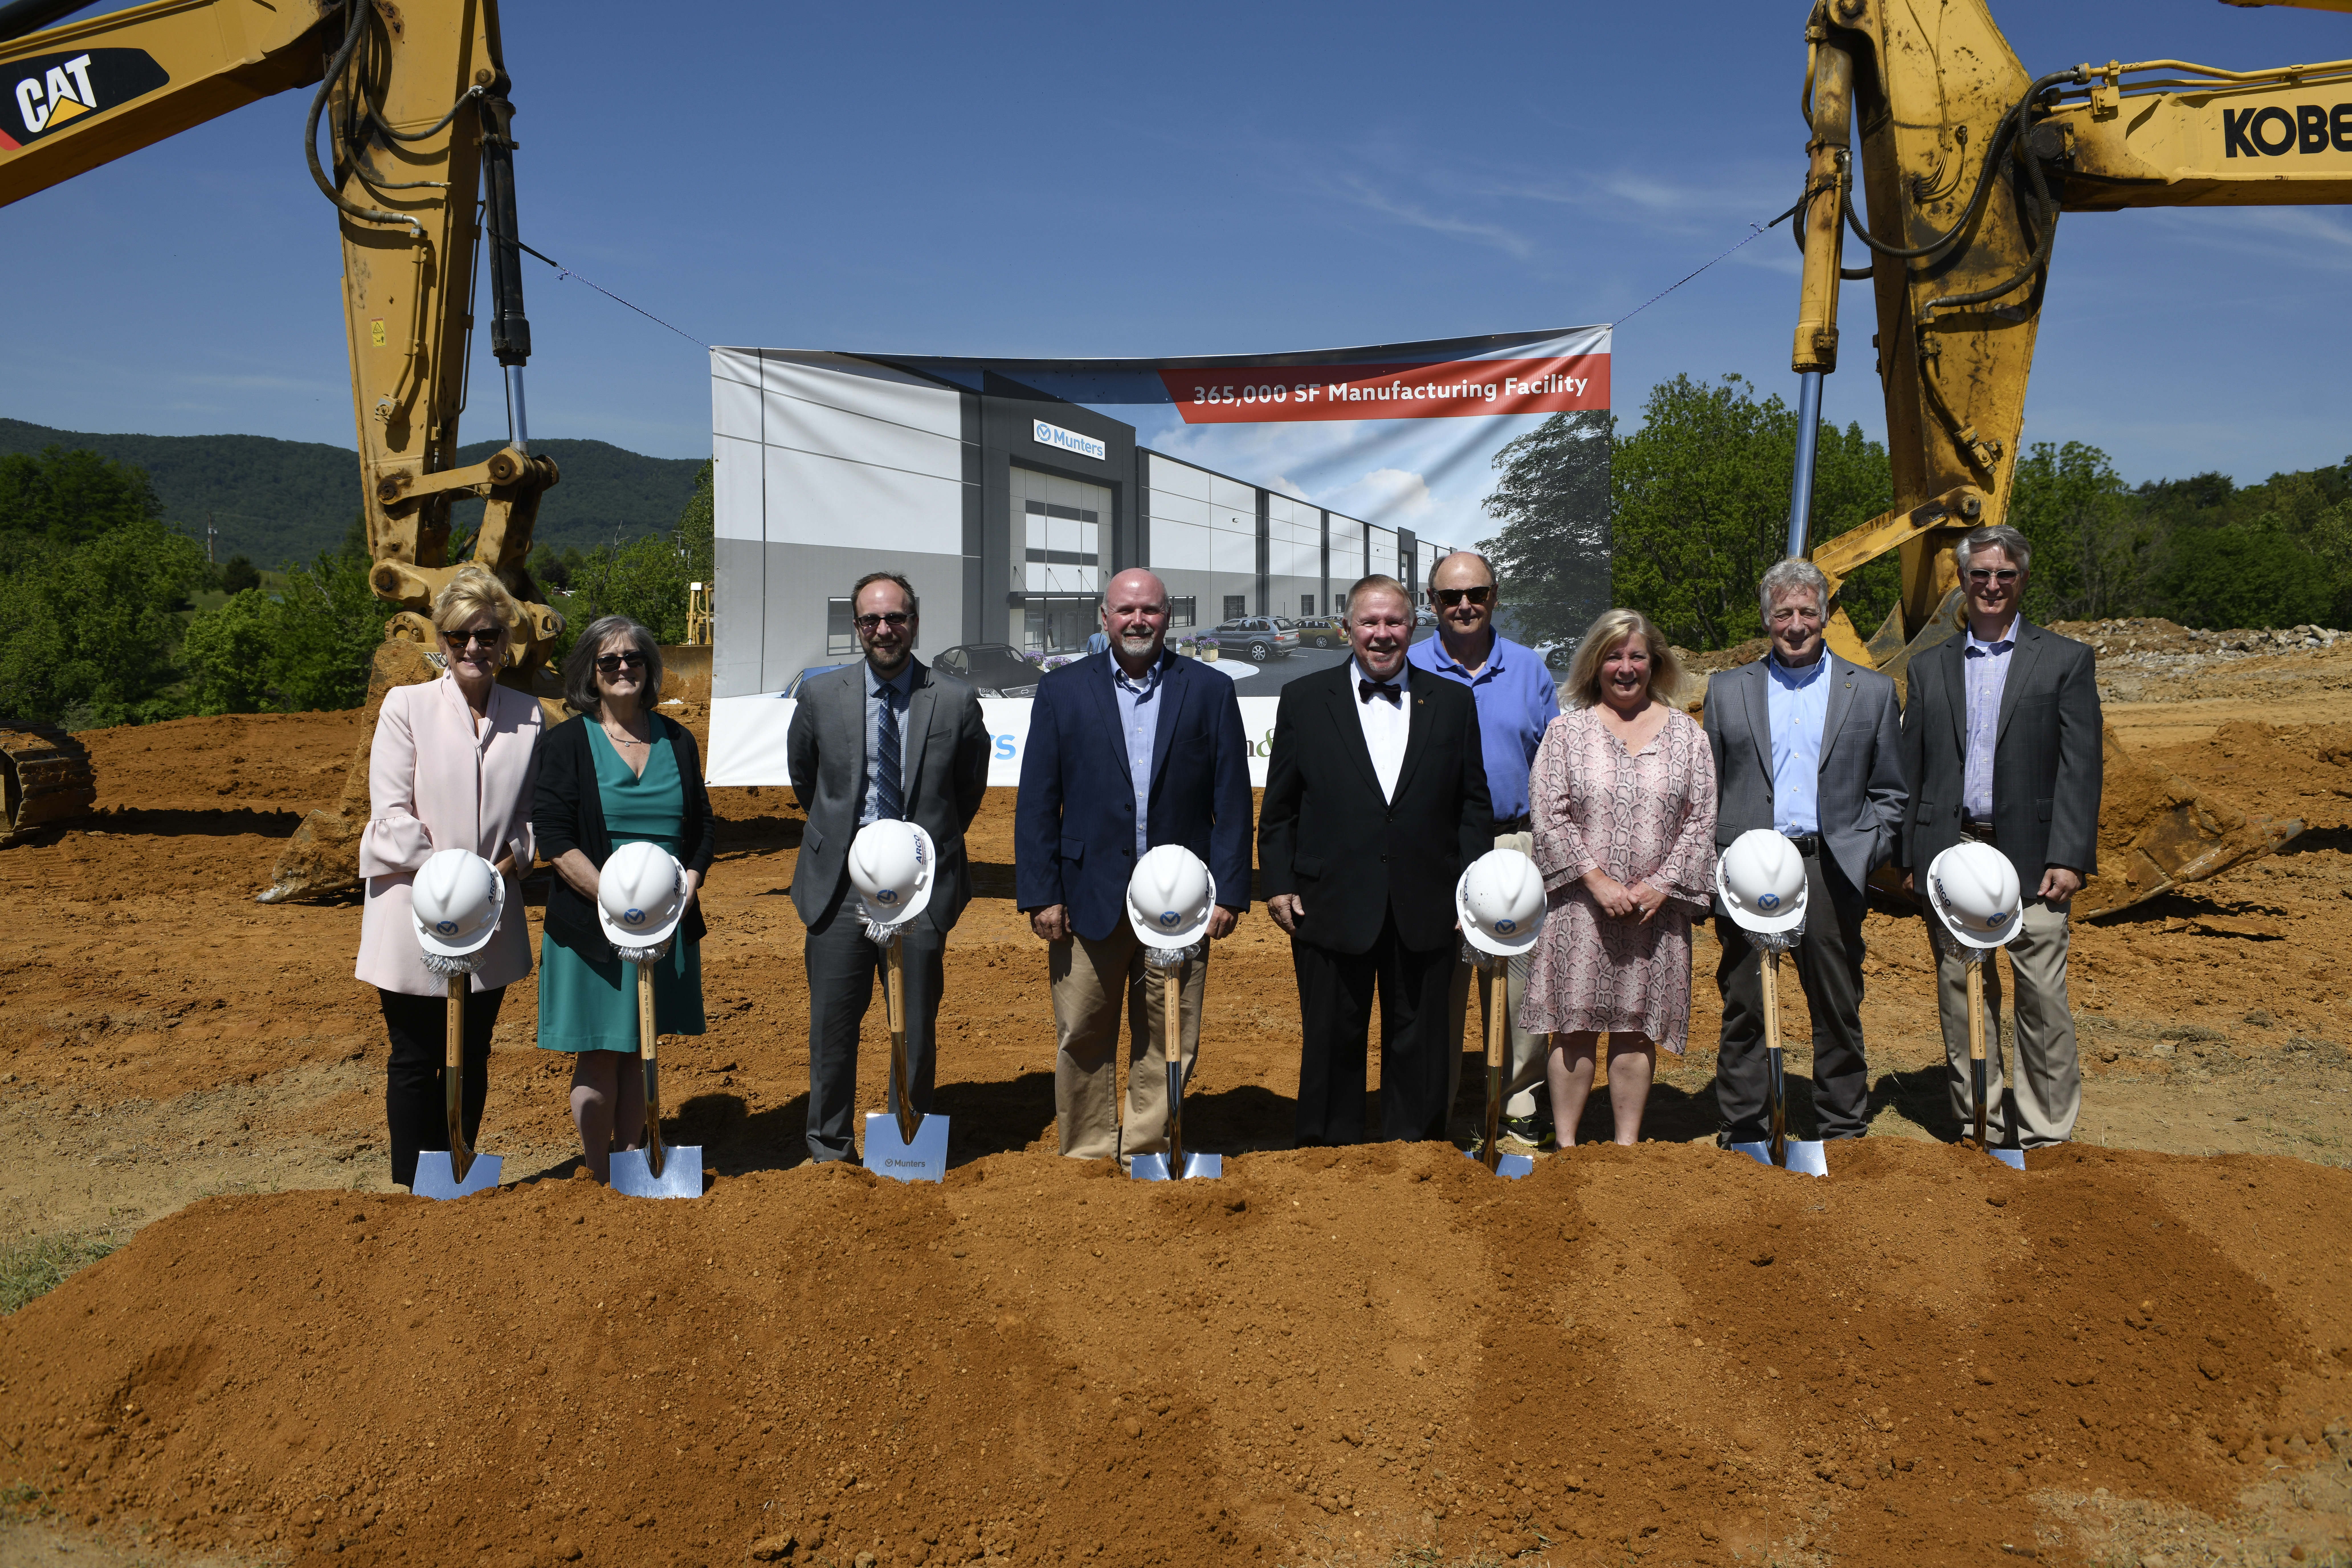 business professionals posing for a groundbreaking ceremony with shovels and hardhats.